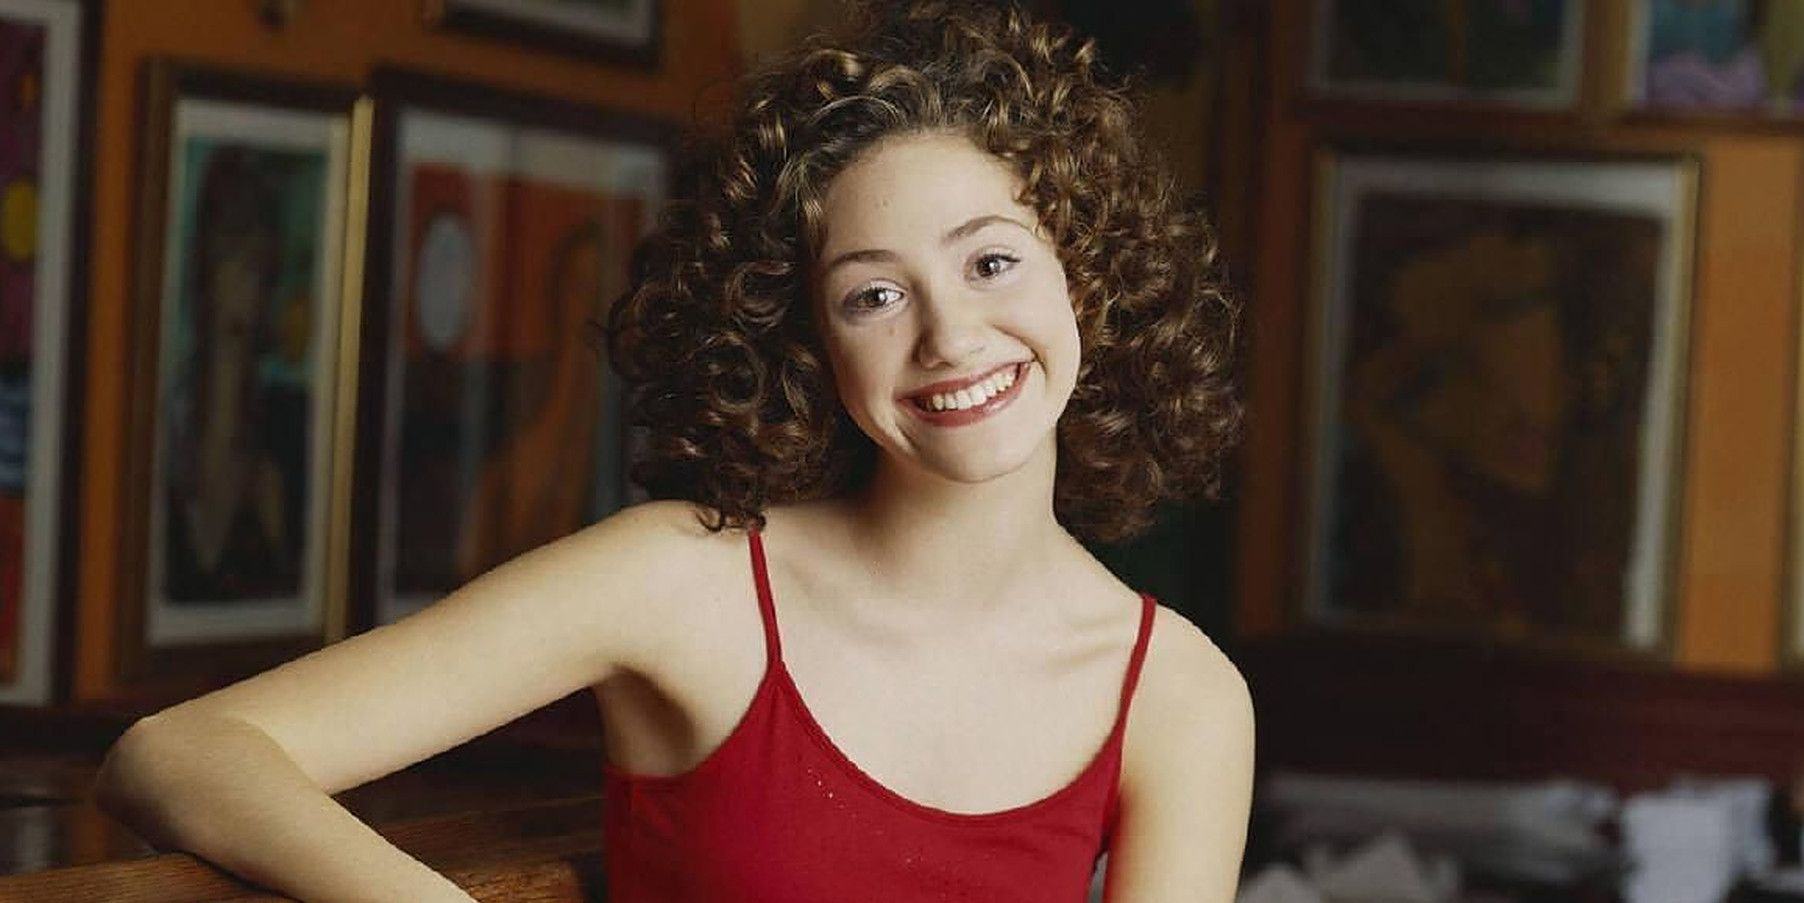 Emmy Rossum in her youth